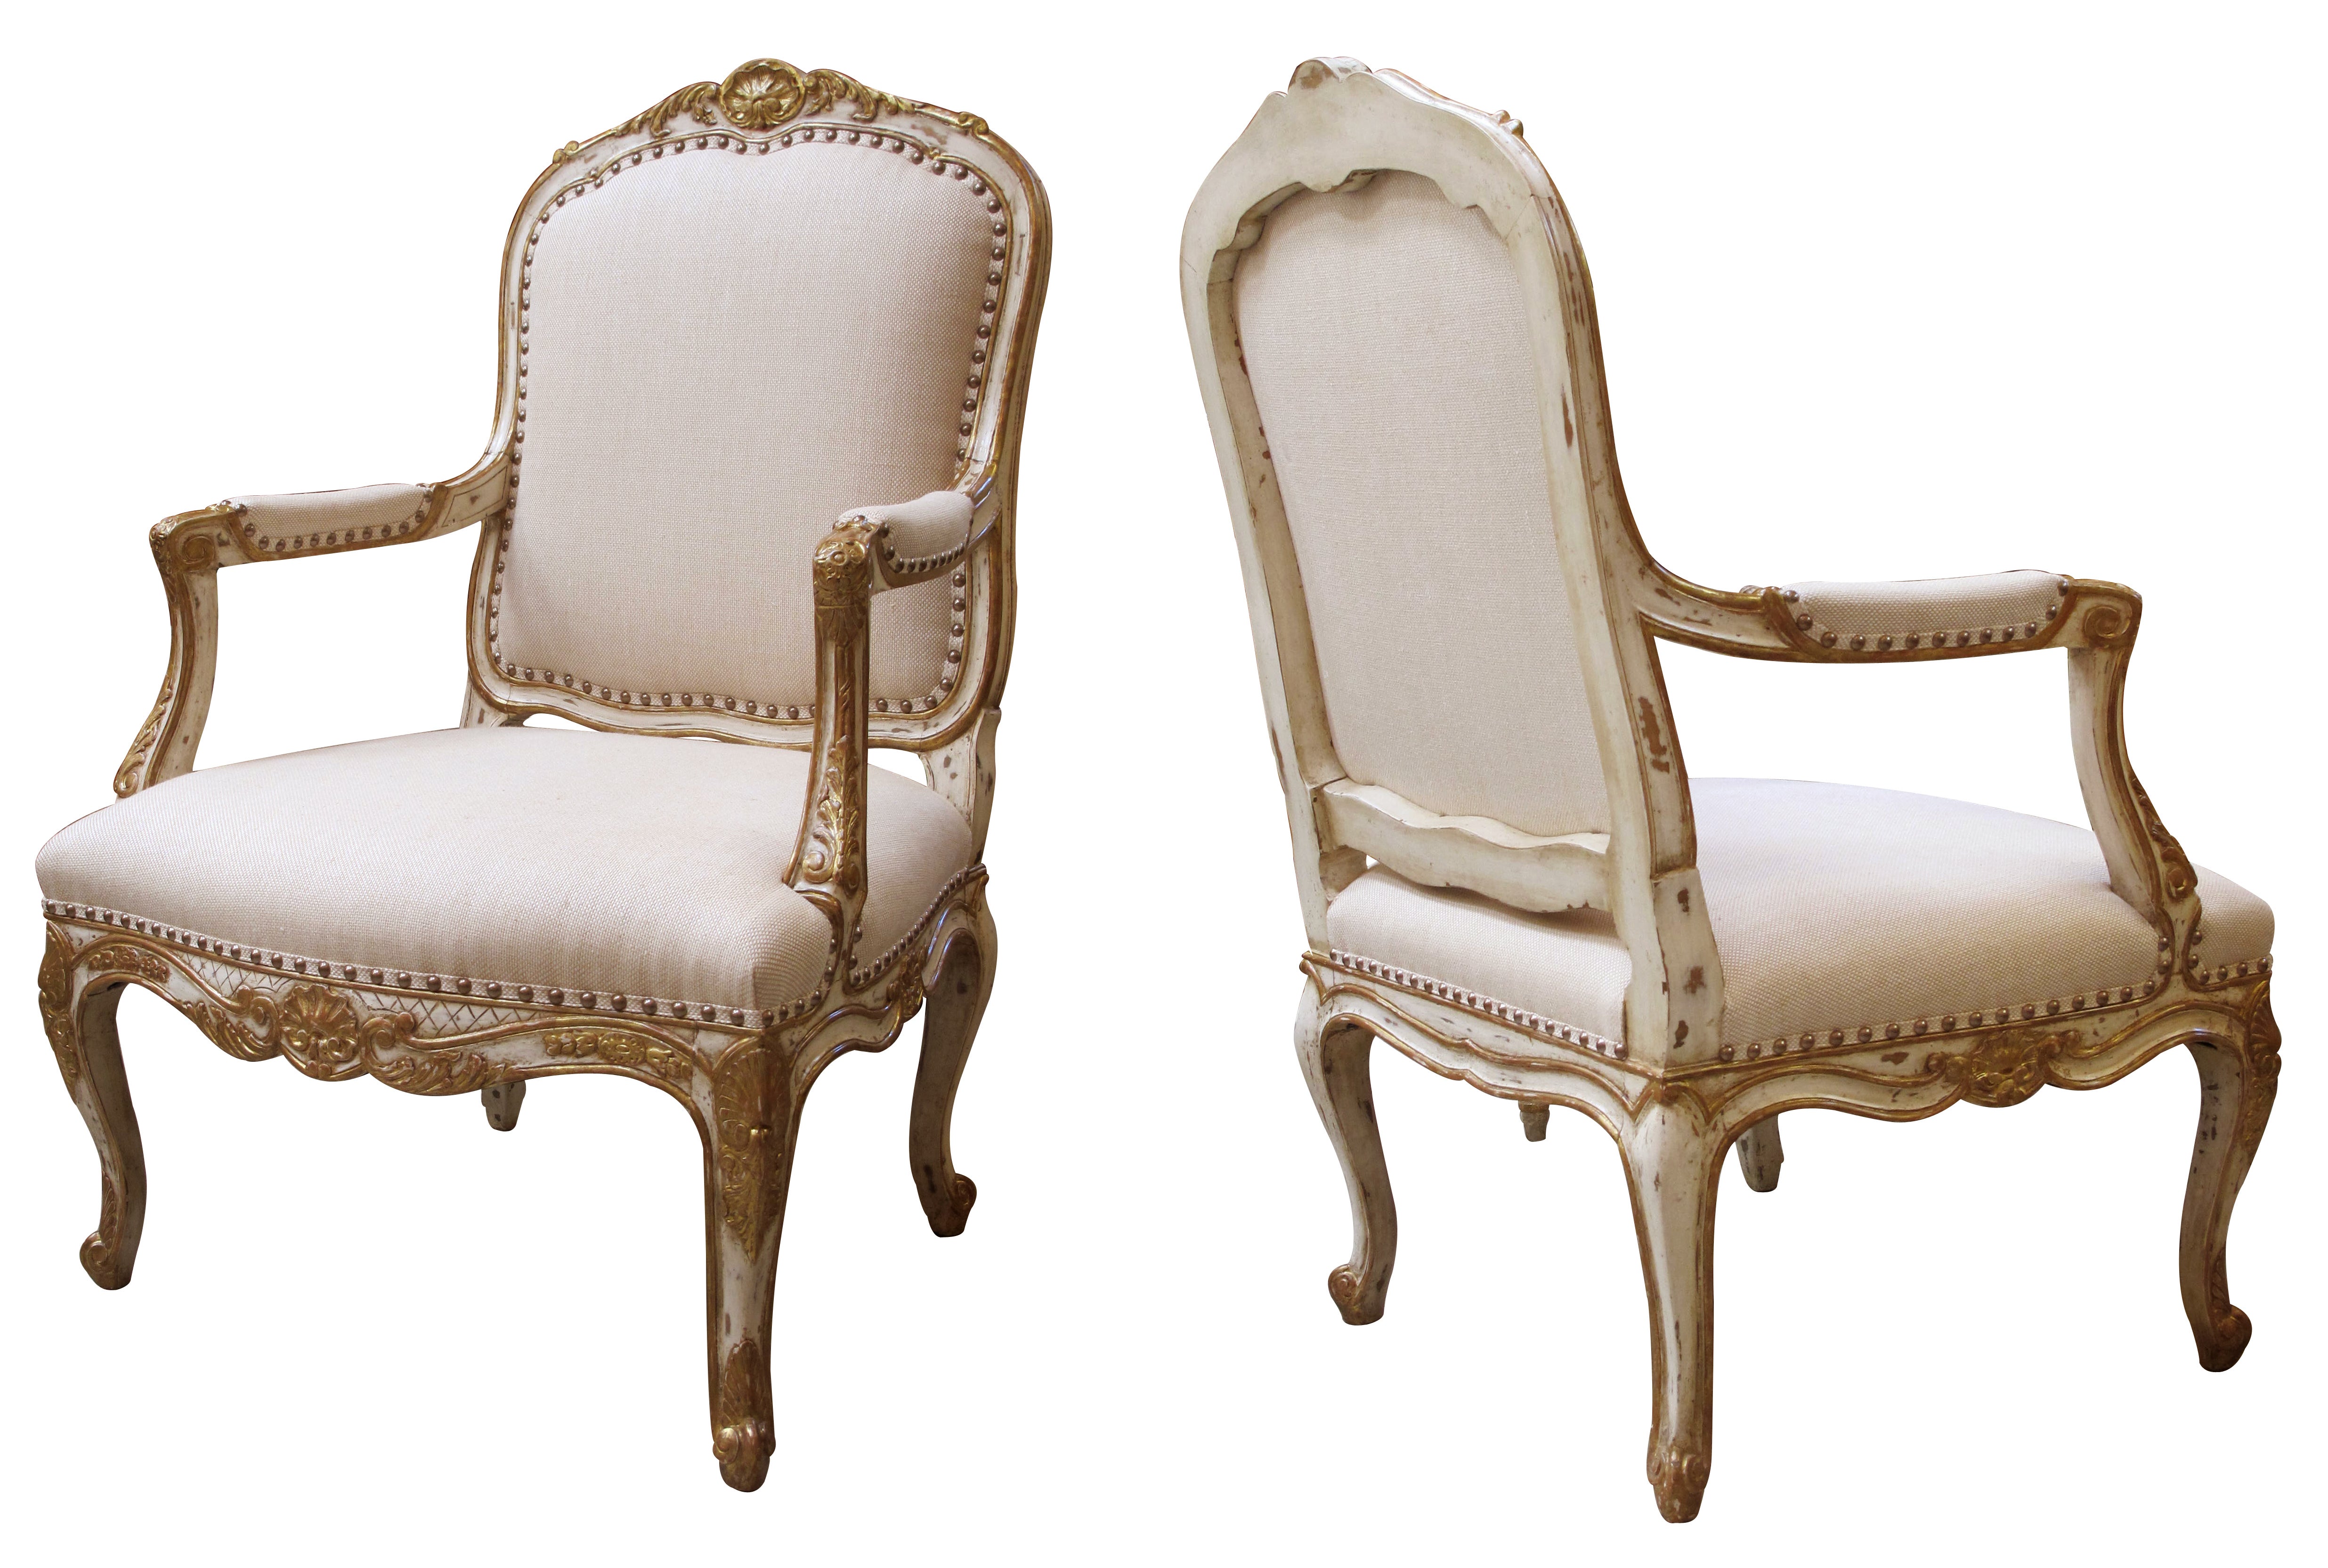 A Handsome Pair of French Louis XV Style Ivory Painted & Parcel-Gilt Arm Chairs